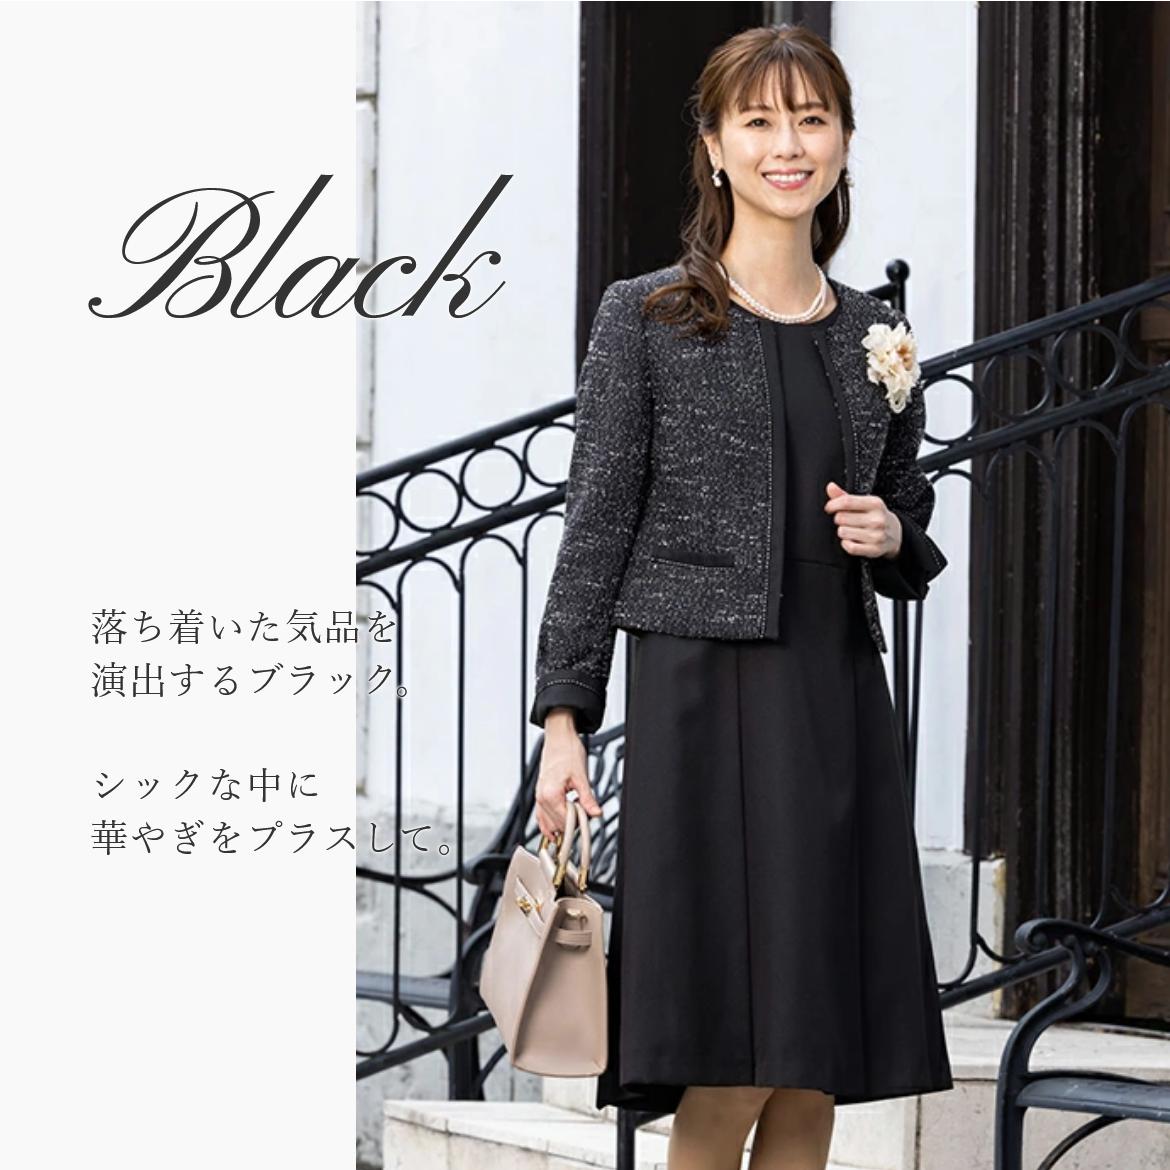  suit lady's formal suit One-piece suit clothes equipment go in . type ceremony suit go in . type .. type graduation ceremony mama .30 fee 40 fee 50 fee 60 fee face join awarding type 